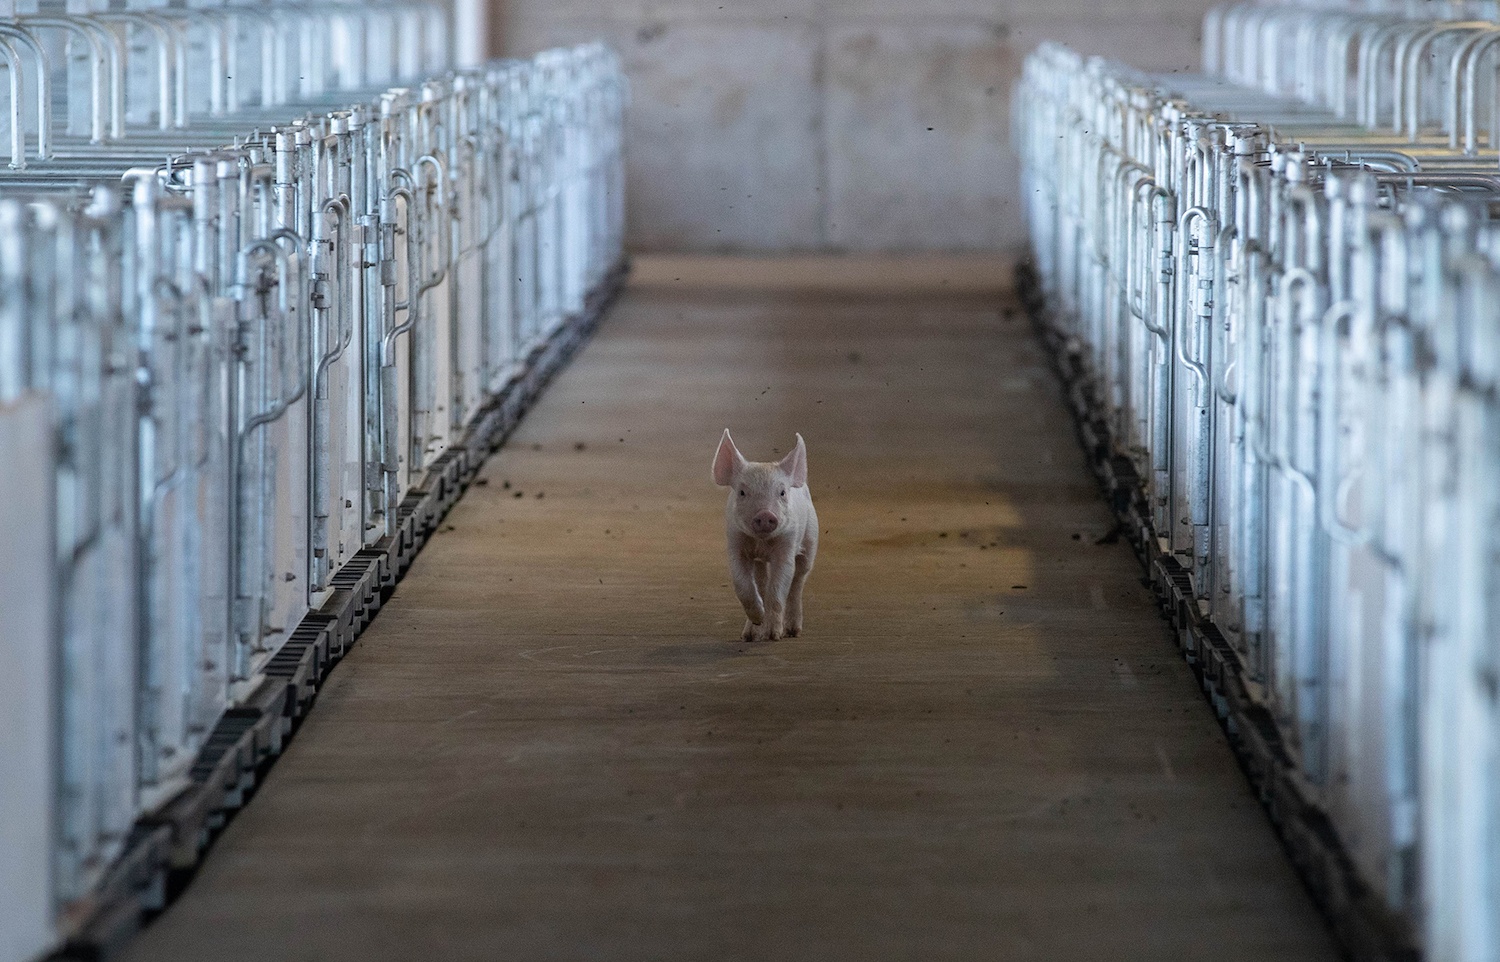 A piglet running down a walkway in between metal gates on either side. 2018